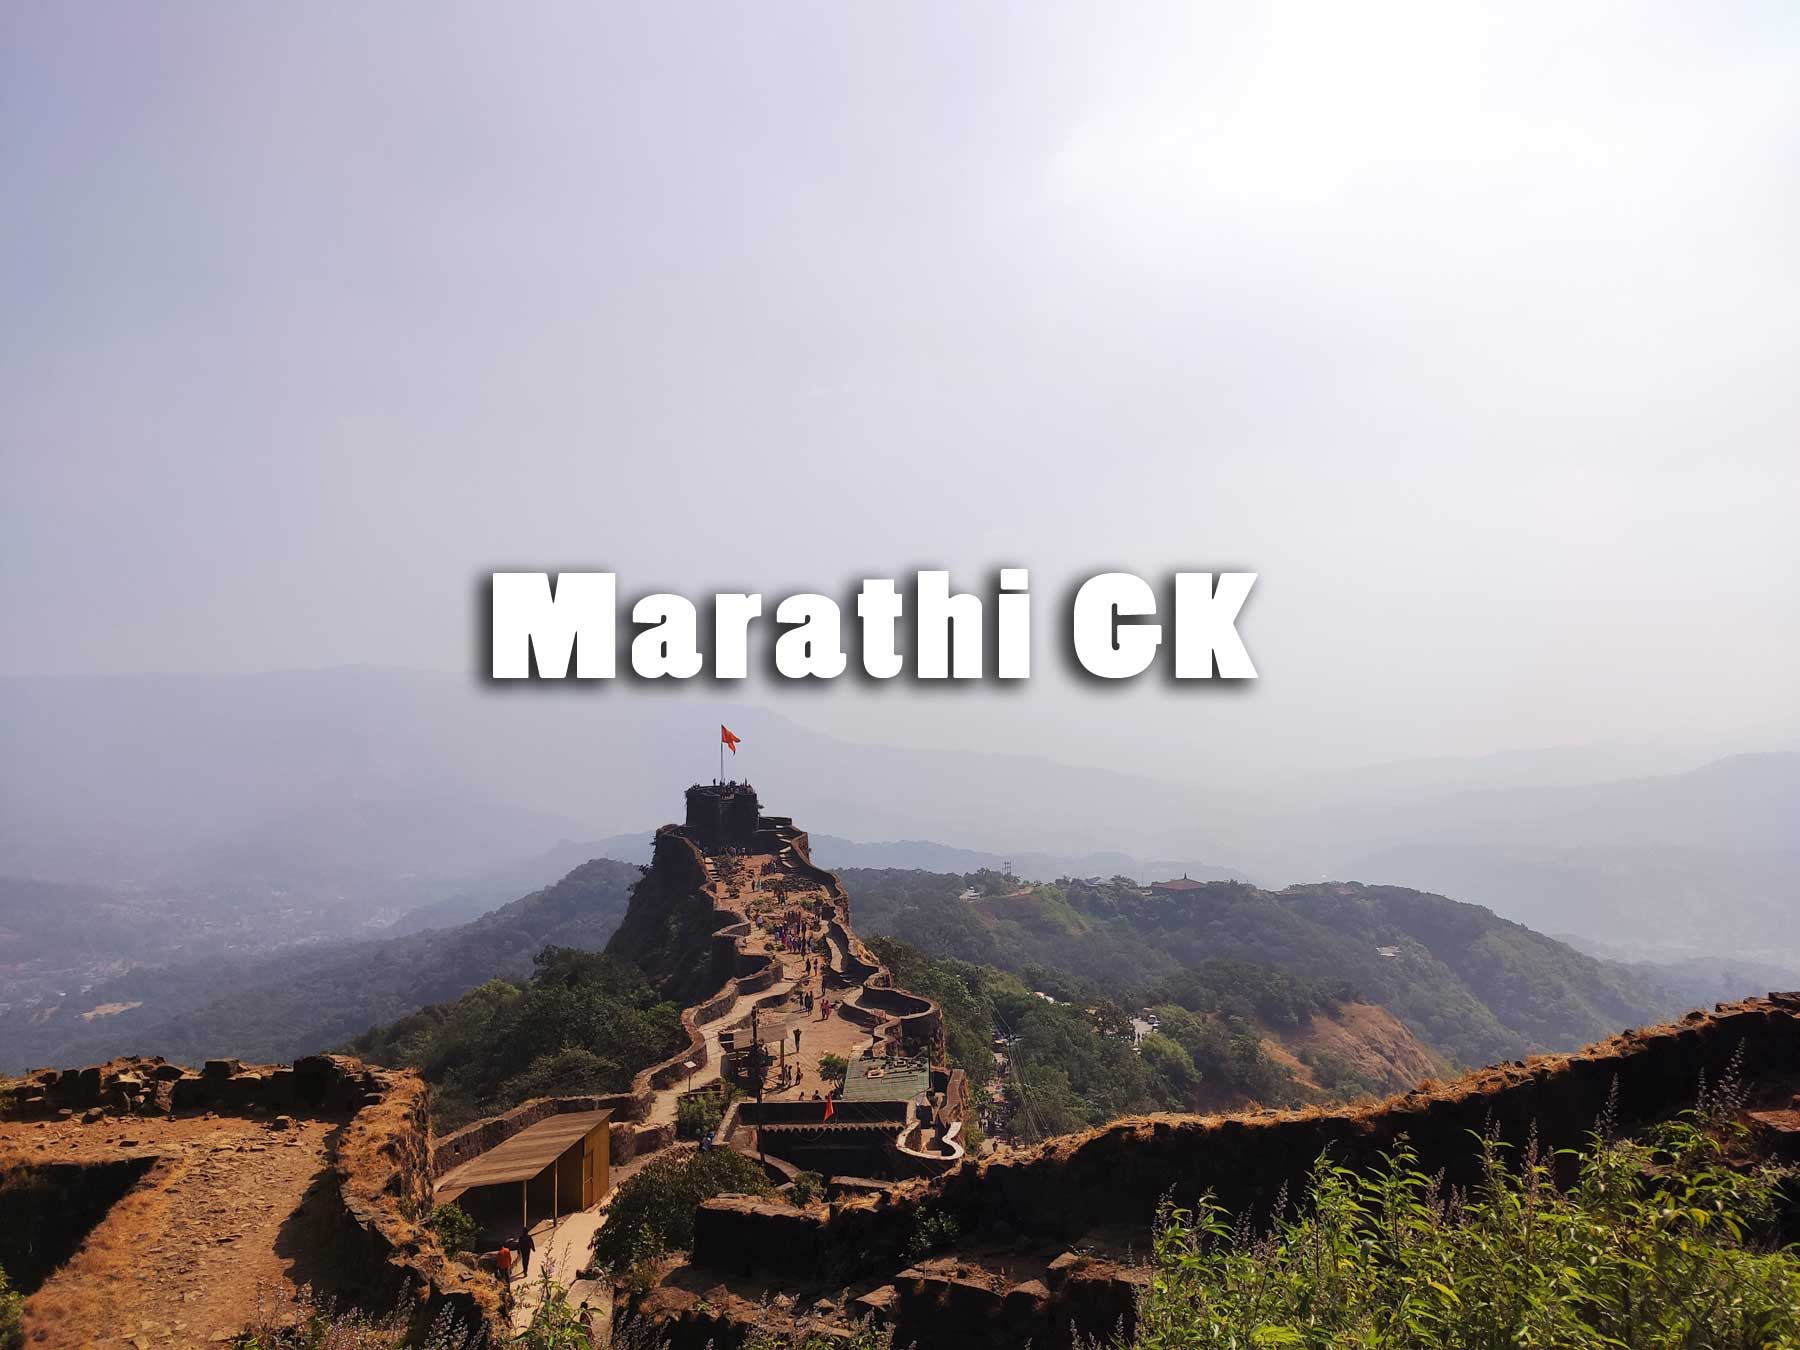 Marathi GK Sample Questions and Answers